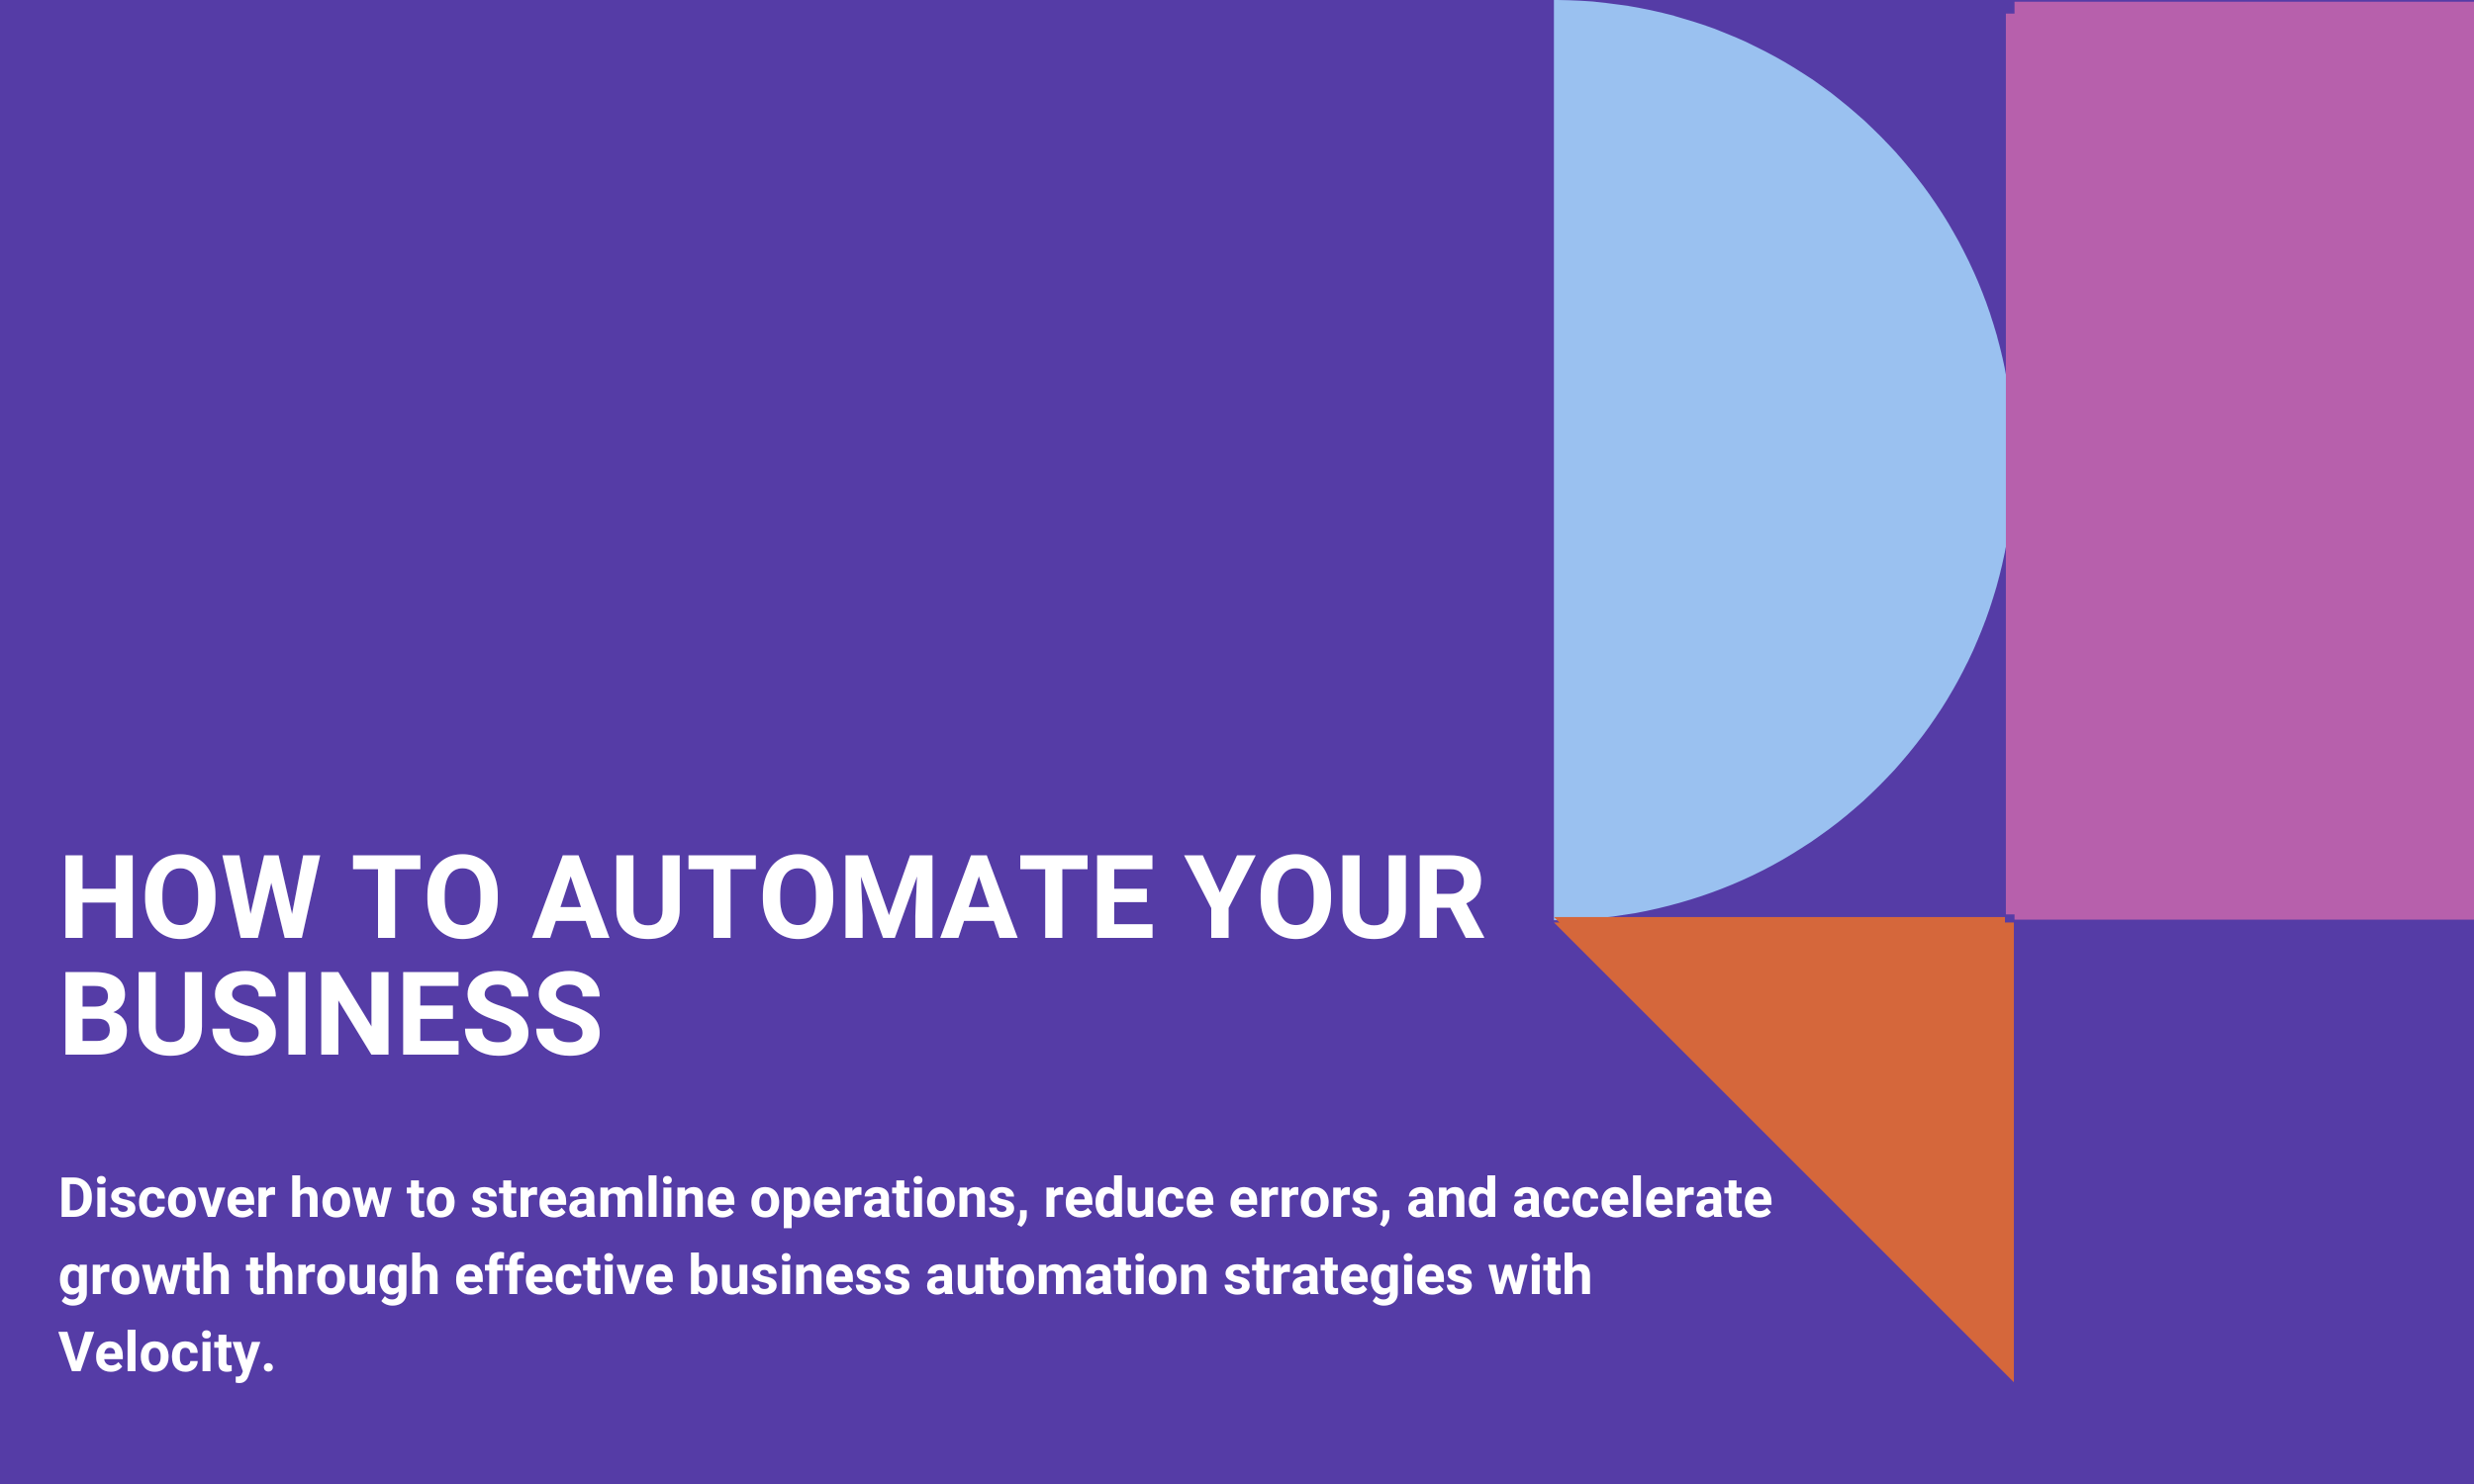 How To Automate Your Business